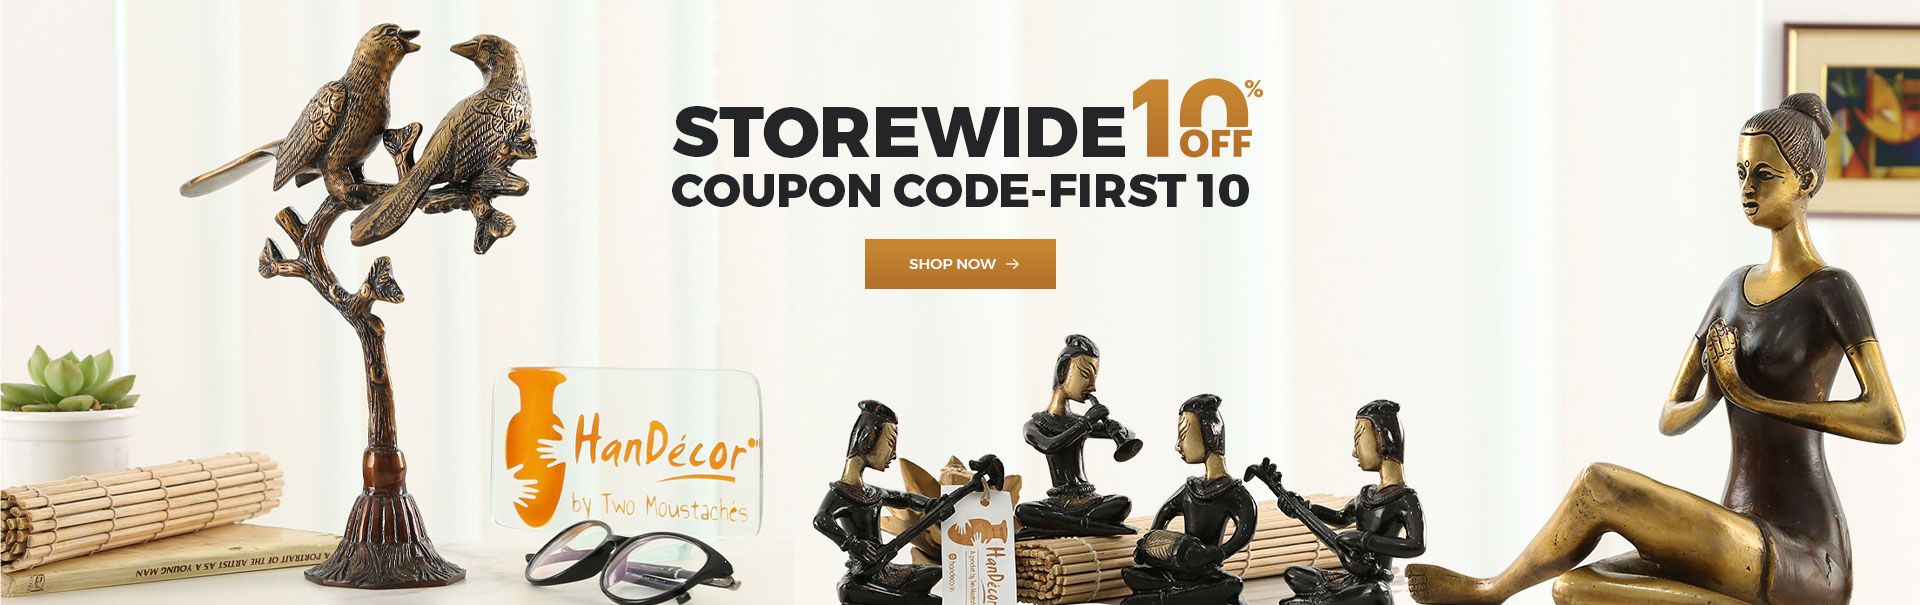 STOREWIDE 10% OFF COUPON CODE- FIRST10